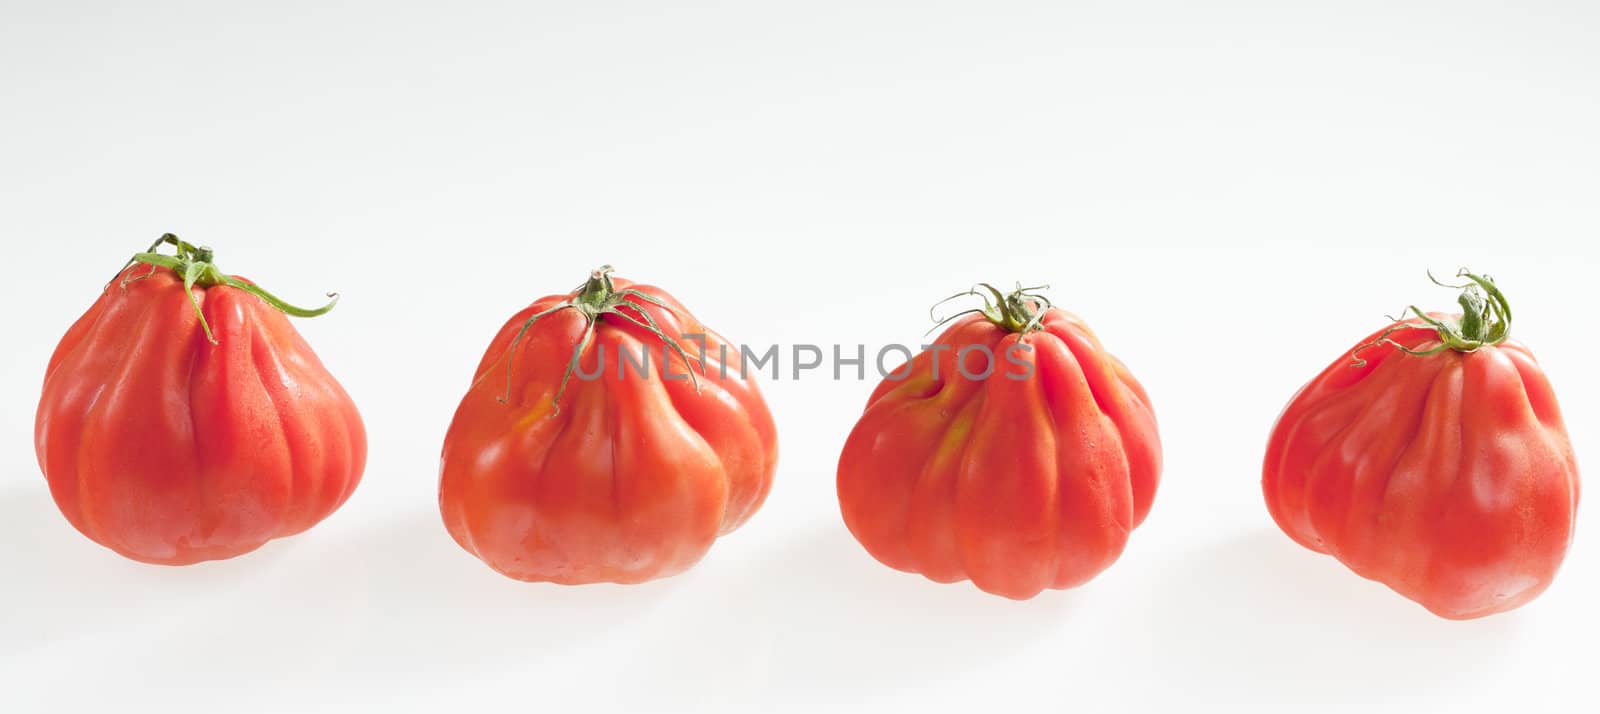 tomatoes by phbcz